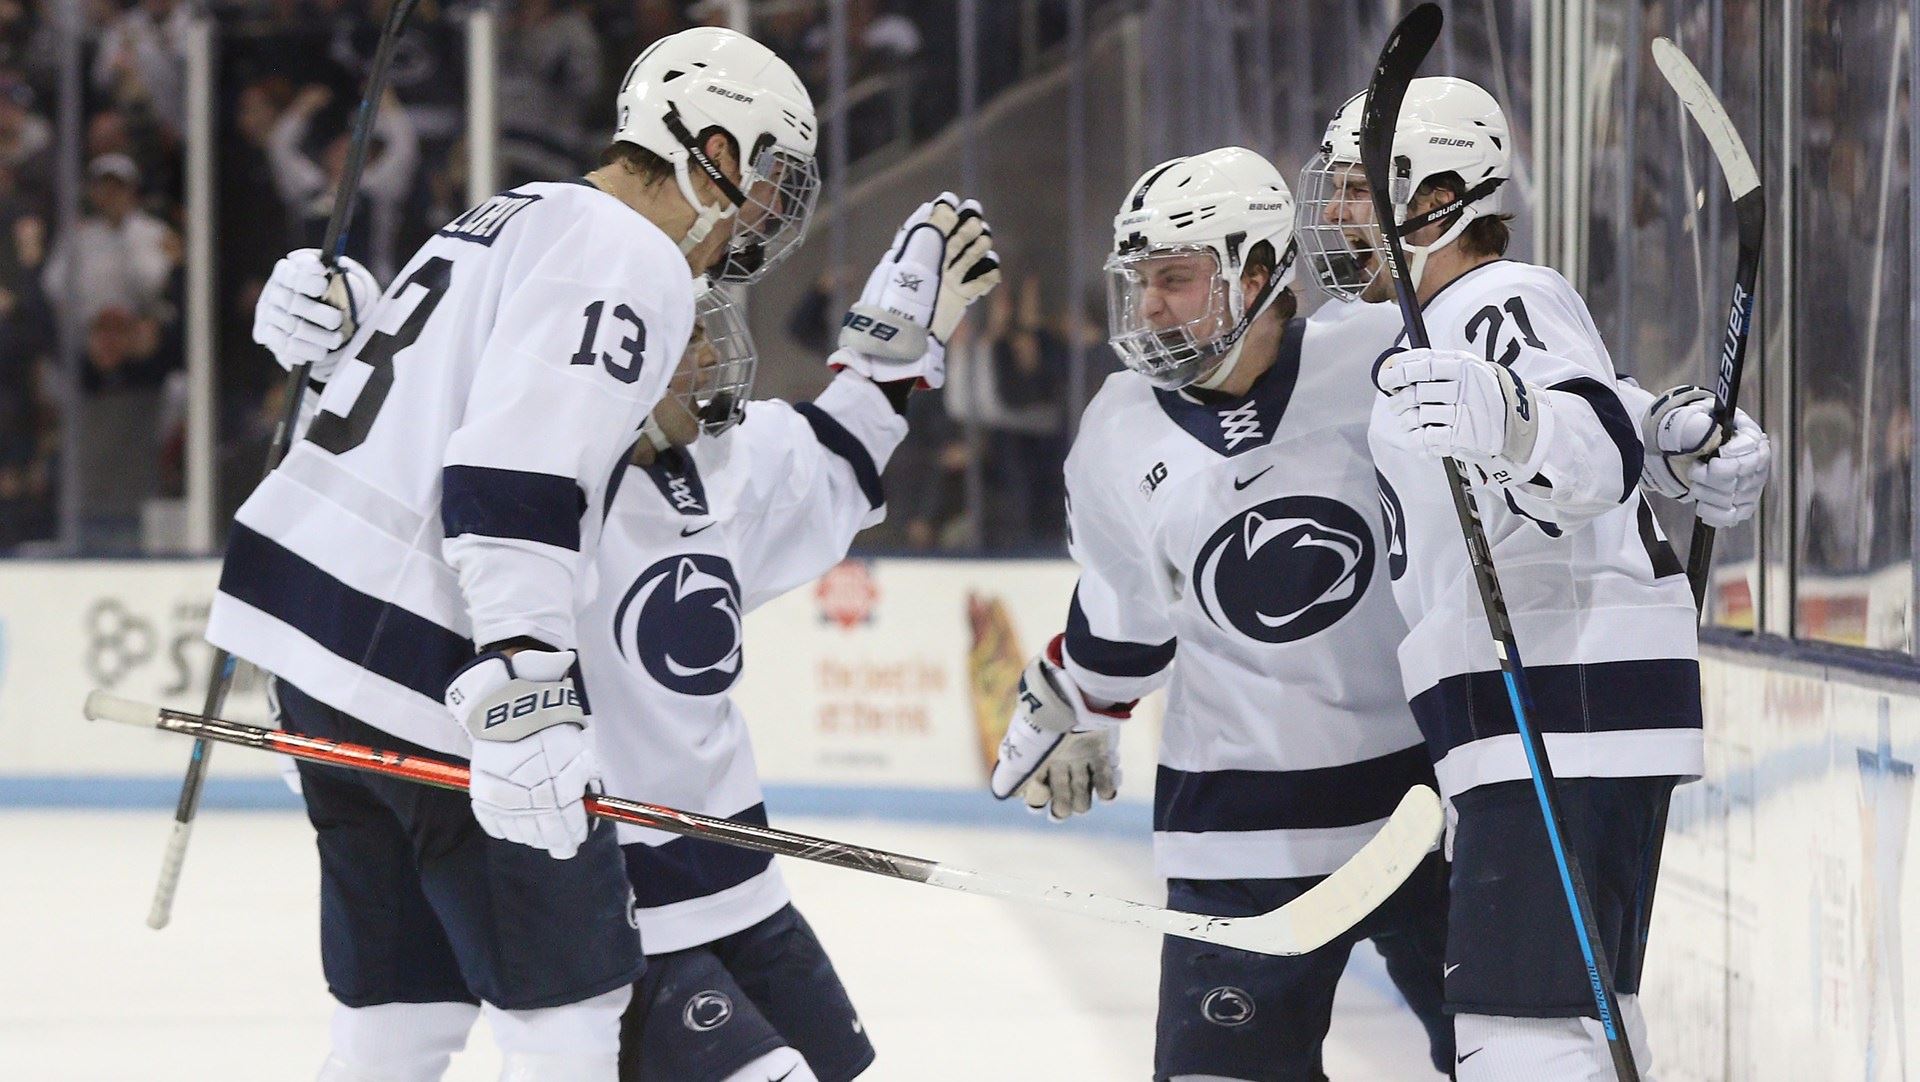 Penn State gets No. 1 seed and bye in Big Ten men's hockey tournament